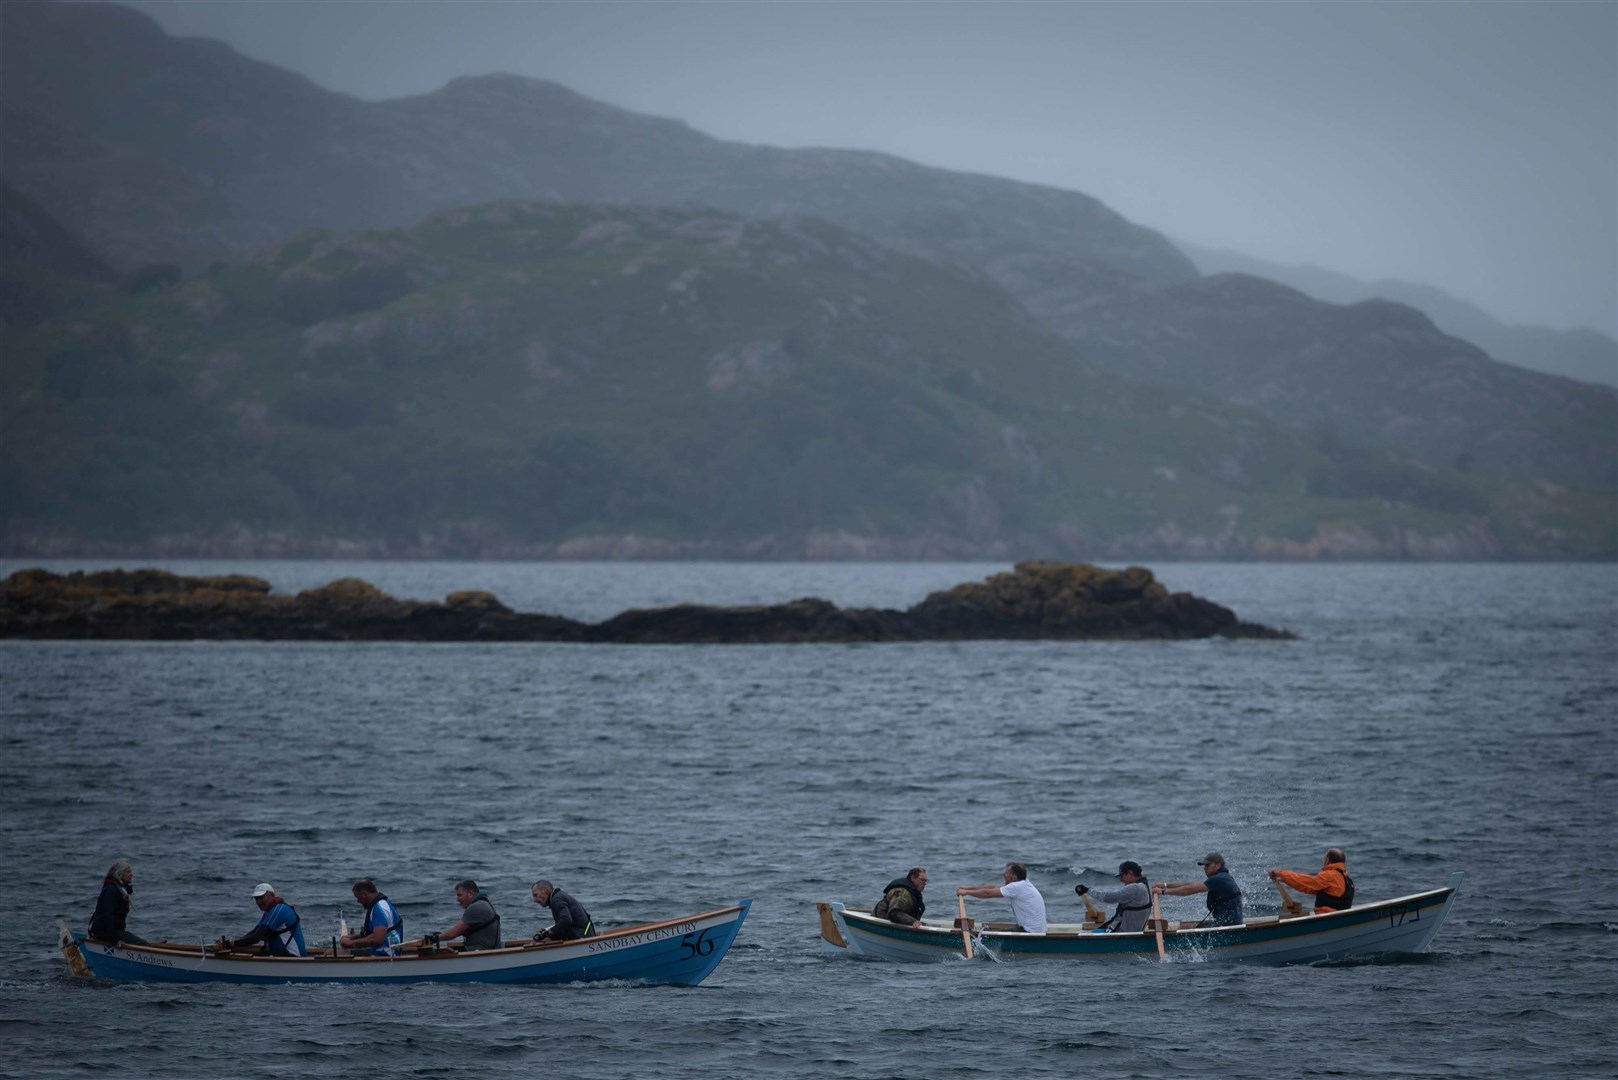 The Shieldaig fete and regatta have been cancelled this year and rescheduled for next August.